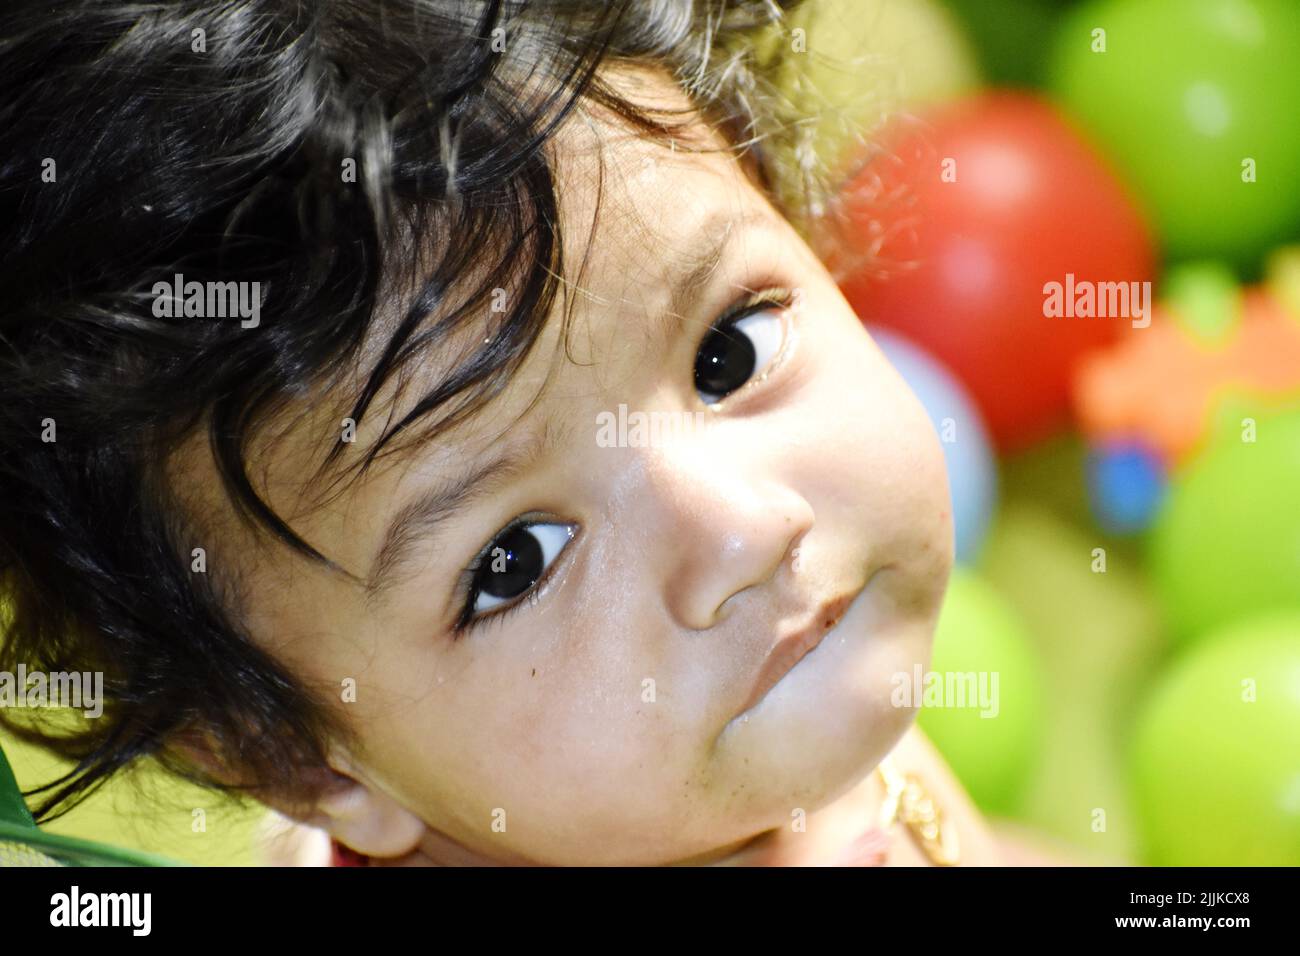 A portrait of a cute little Indian baby with big eyes in the playground Stock Photo